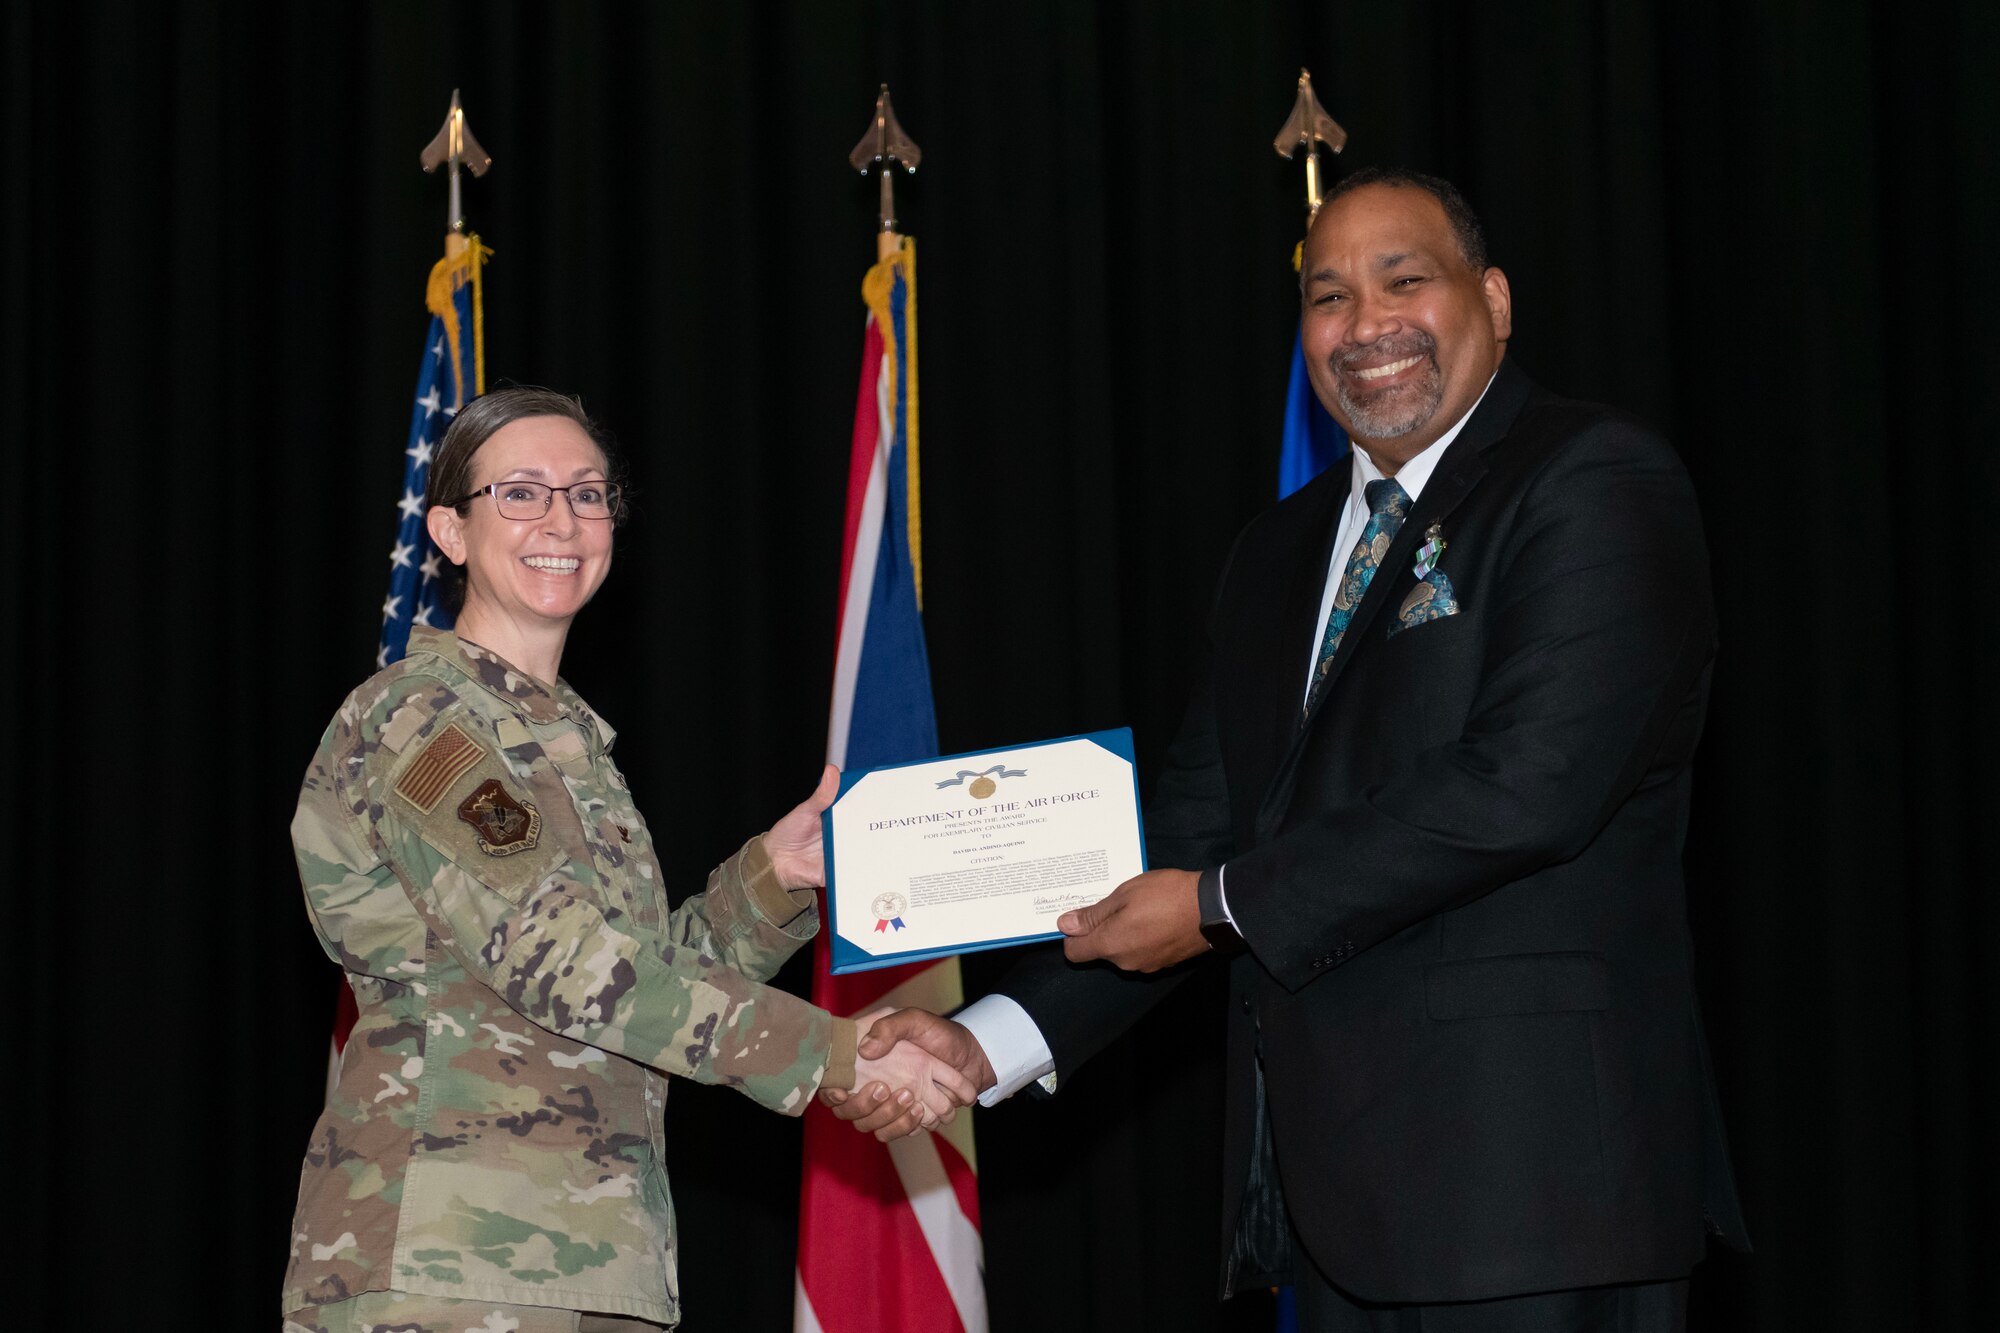 U.S. Air Force Col. Valarie Long, left, 423d Air Base Group commander, presents David Andino-Aquino, right, 421st Air Base Squadron director, the award of exemplary civilian service during a 421st ABS Relinquishment of Responsibility ceremony at RAF Alconbury, England, March 17, 2023. Andino-Aquino relinquished responsibility as 421st Air Base Squadron director. (U.S. Air Force photo by Staff Sgt. Jennifer Zima)